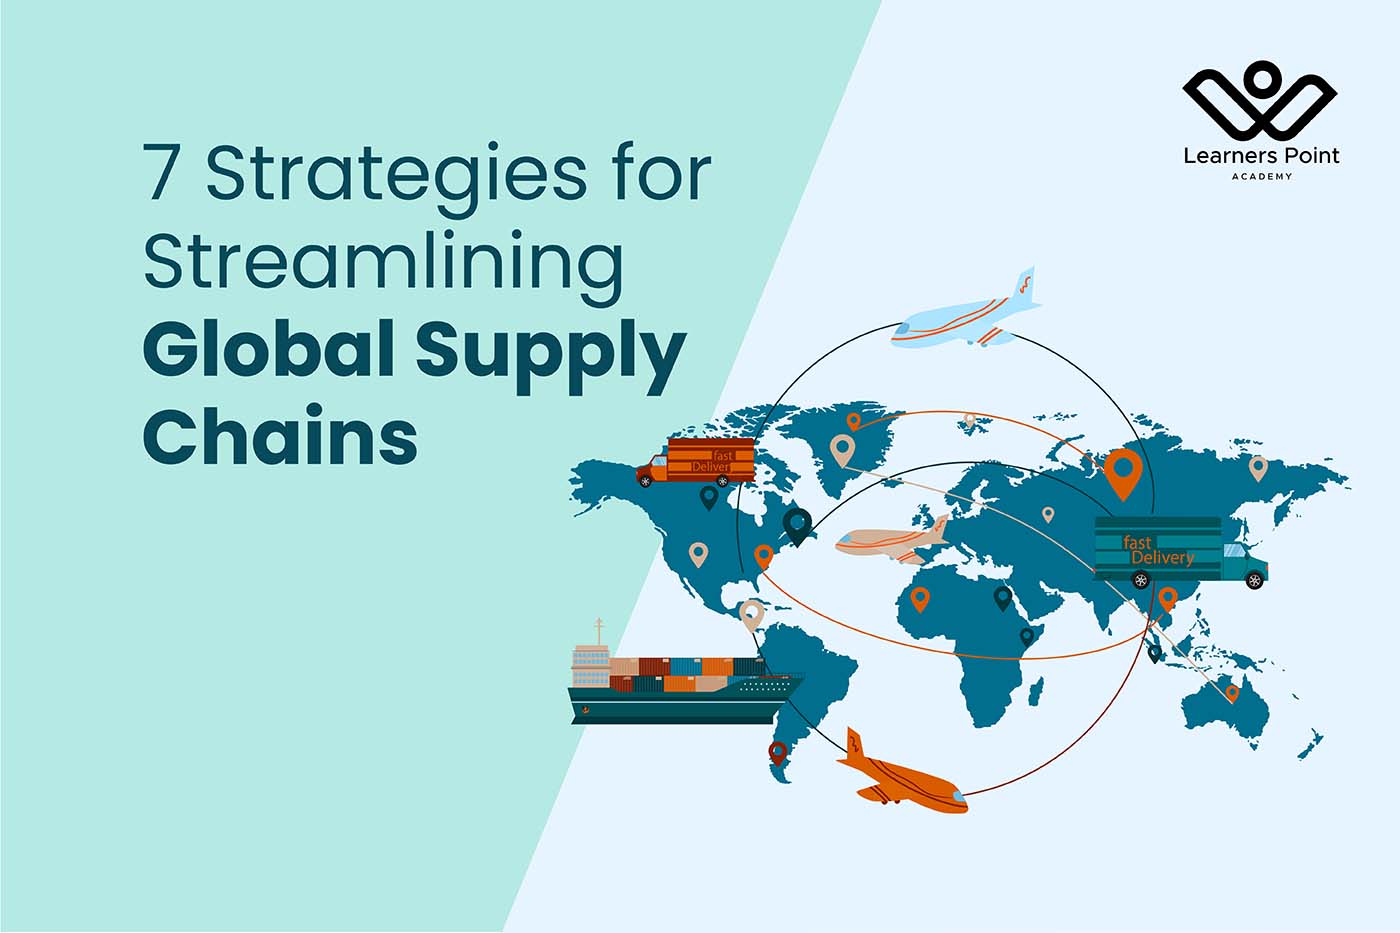 7 Strategies for Streamlining Global Supply Chains